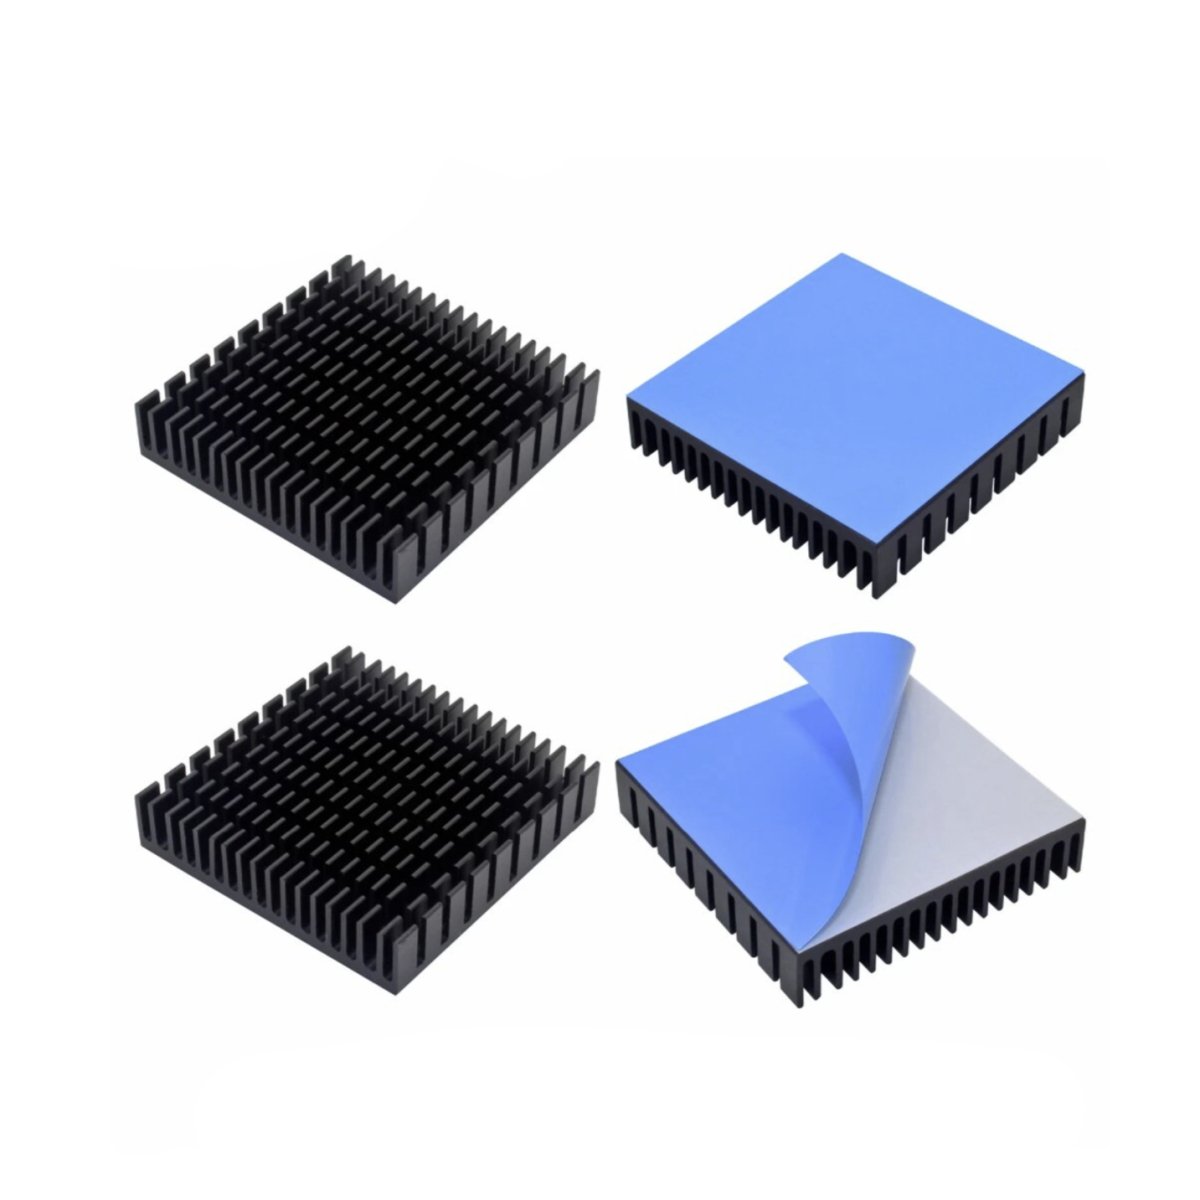 2x Heatsink 50x50x11 40x40x11mm 25x25x10mm 19x19x5mm 14x14x8mm Black Heat Sink - 50x50x11mm (has backing) - - Asia Sell